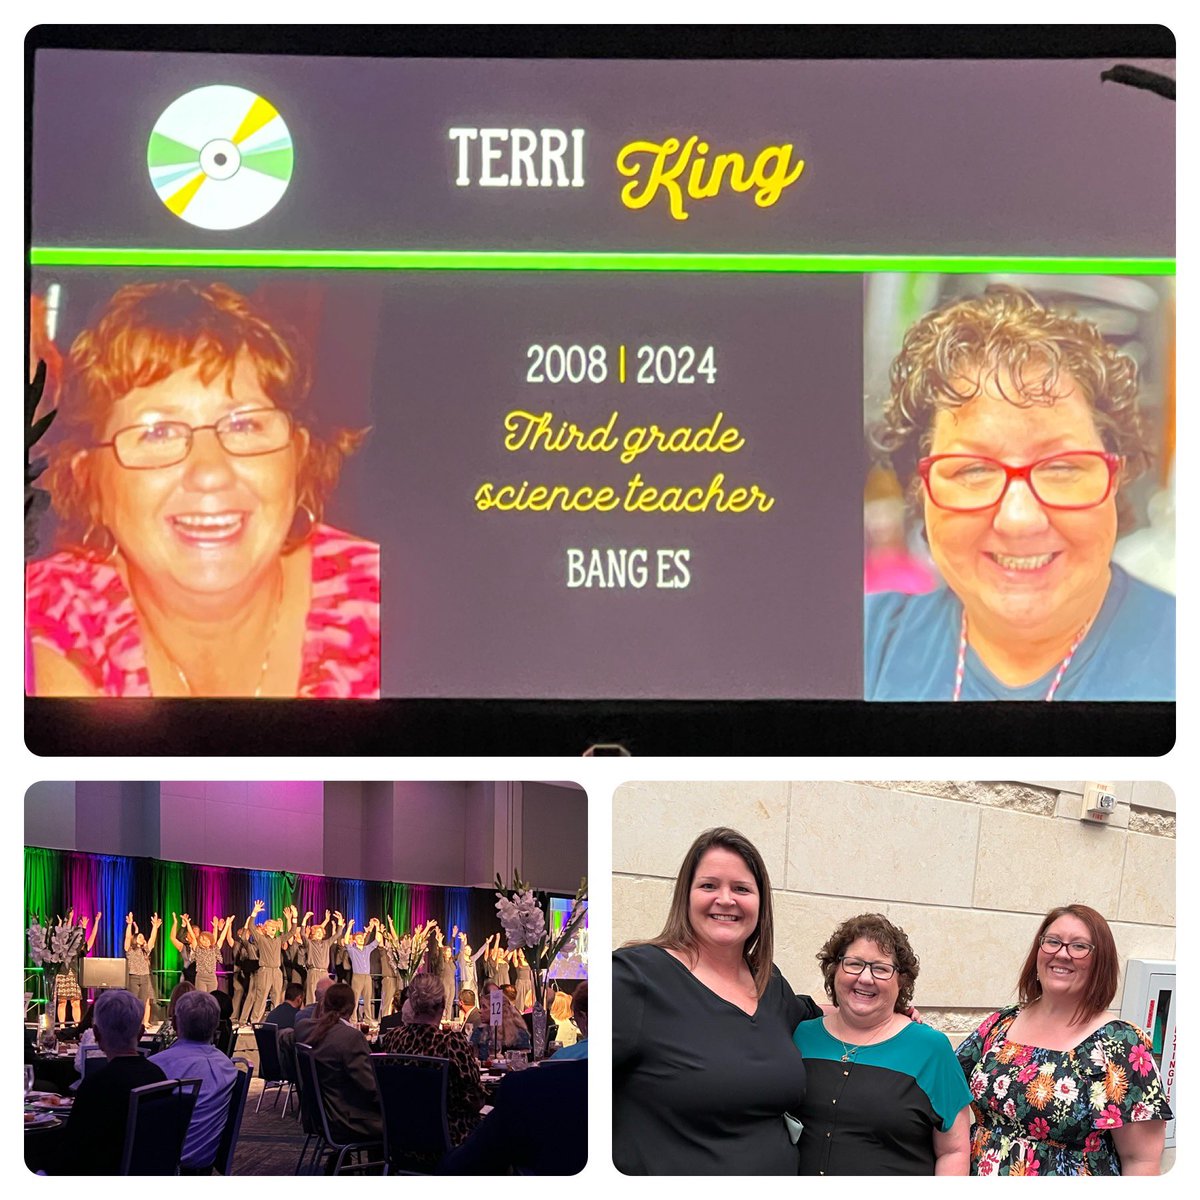 It was an honor to
Celebrate Mrs. Terri King last night at the CFISD Teacher Retirement Banquet. We will miss you Mrs. King. @BangElementary @susan_bolado @KaylaKMouton @MichelleChatag2